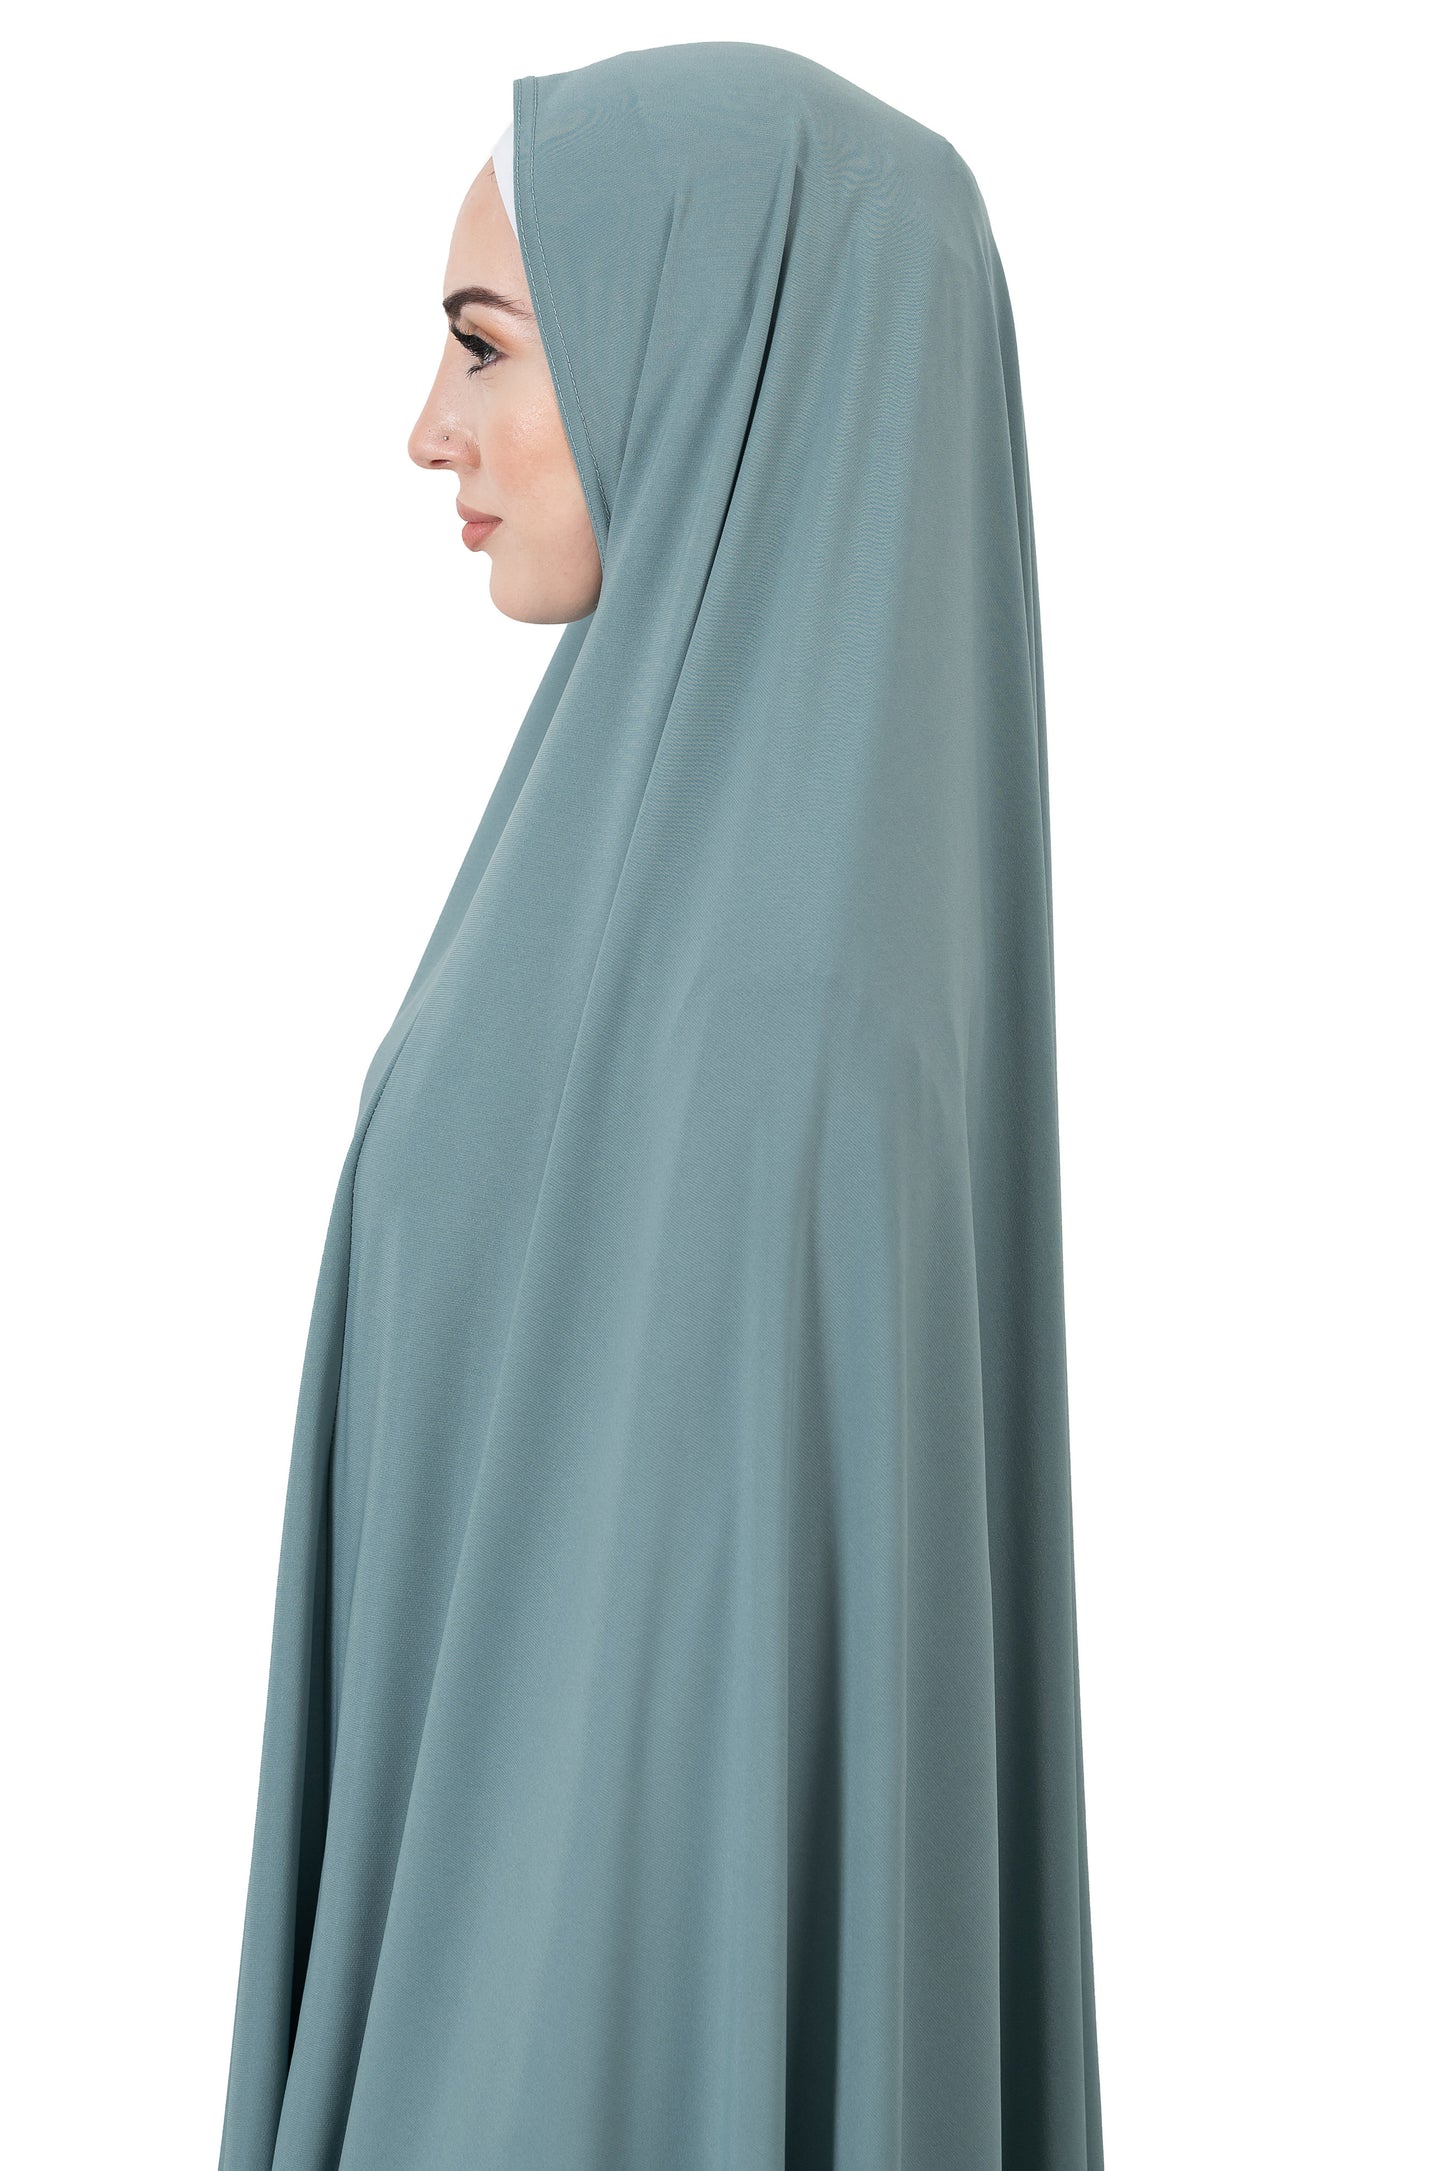 Standard Length Sleeved Jelbab in Med Turquoise - Behind The Veil